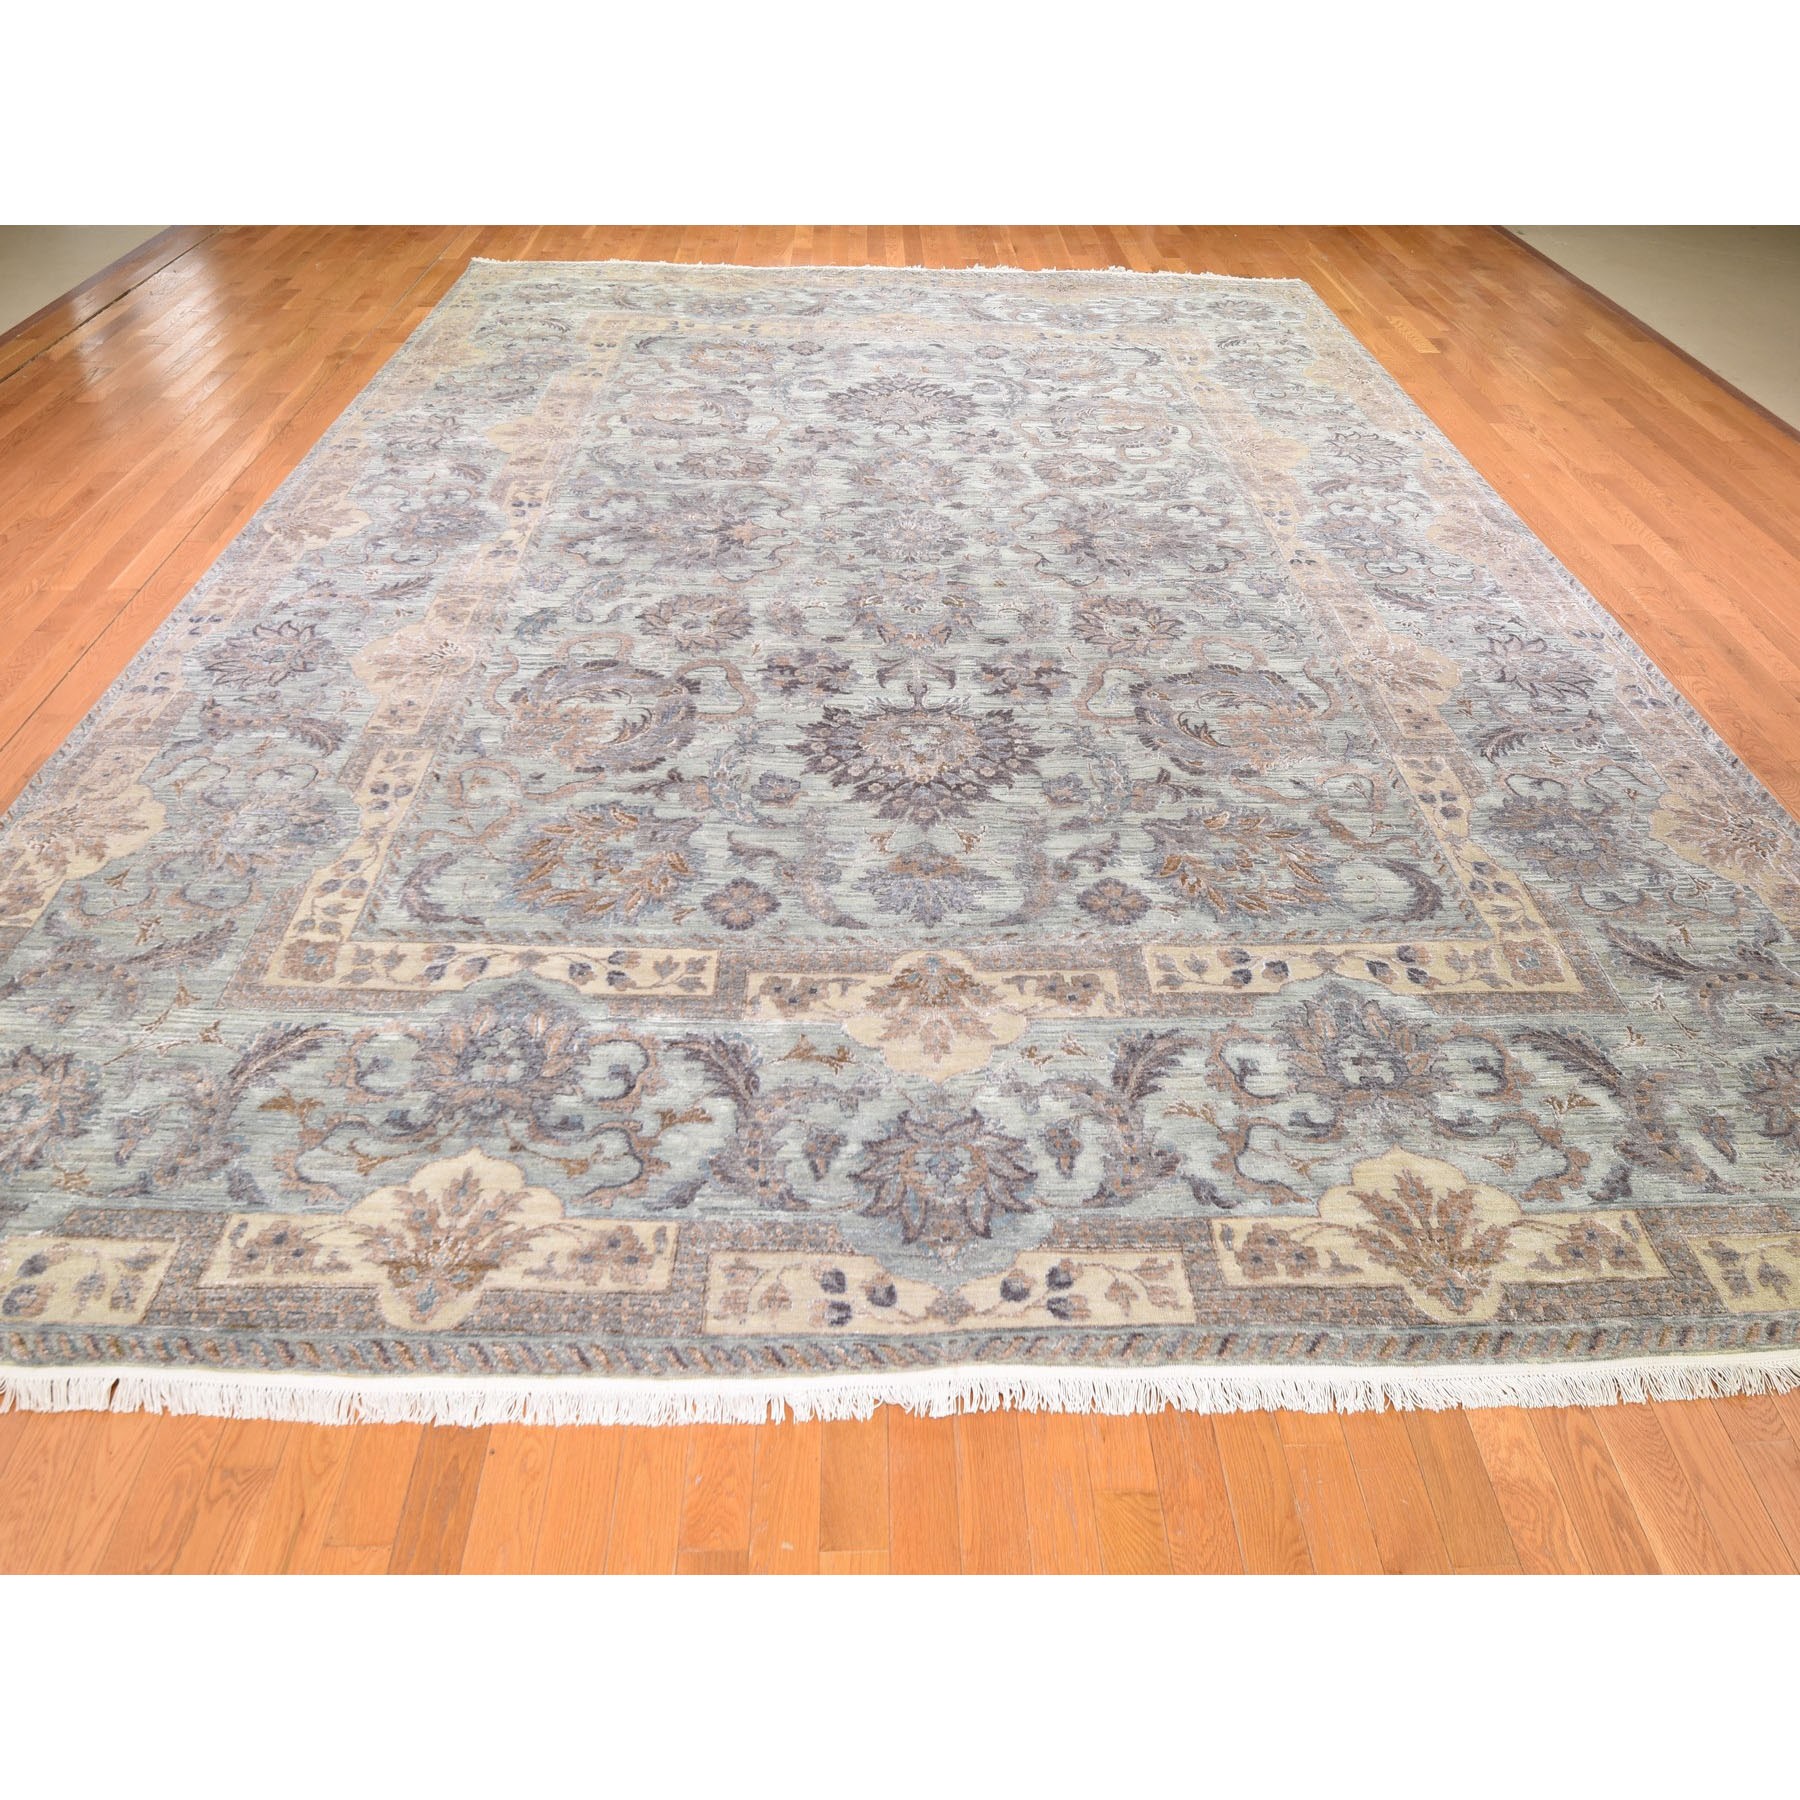 11'8"x15'3" Oversized Light Green Pure Silk With Textured Wool Mughal Design Hand Woven Oriental Rug 